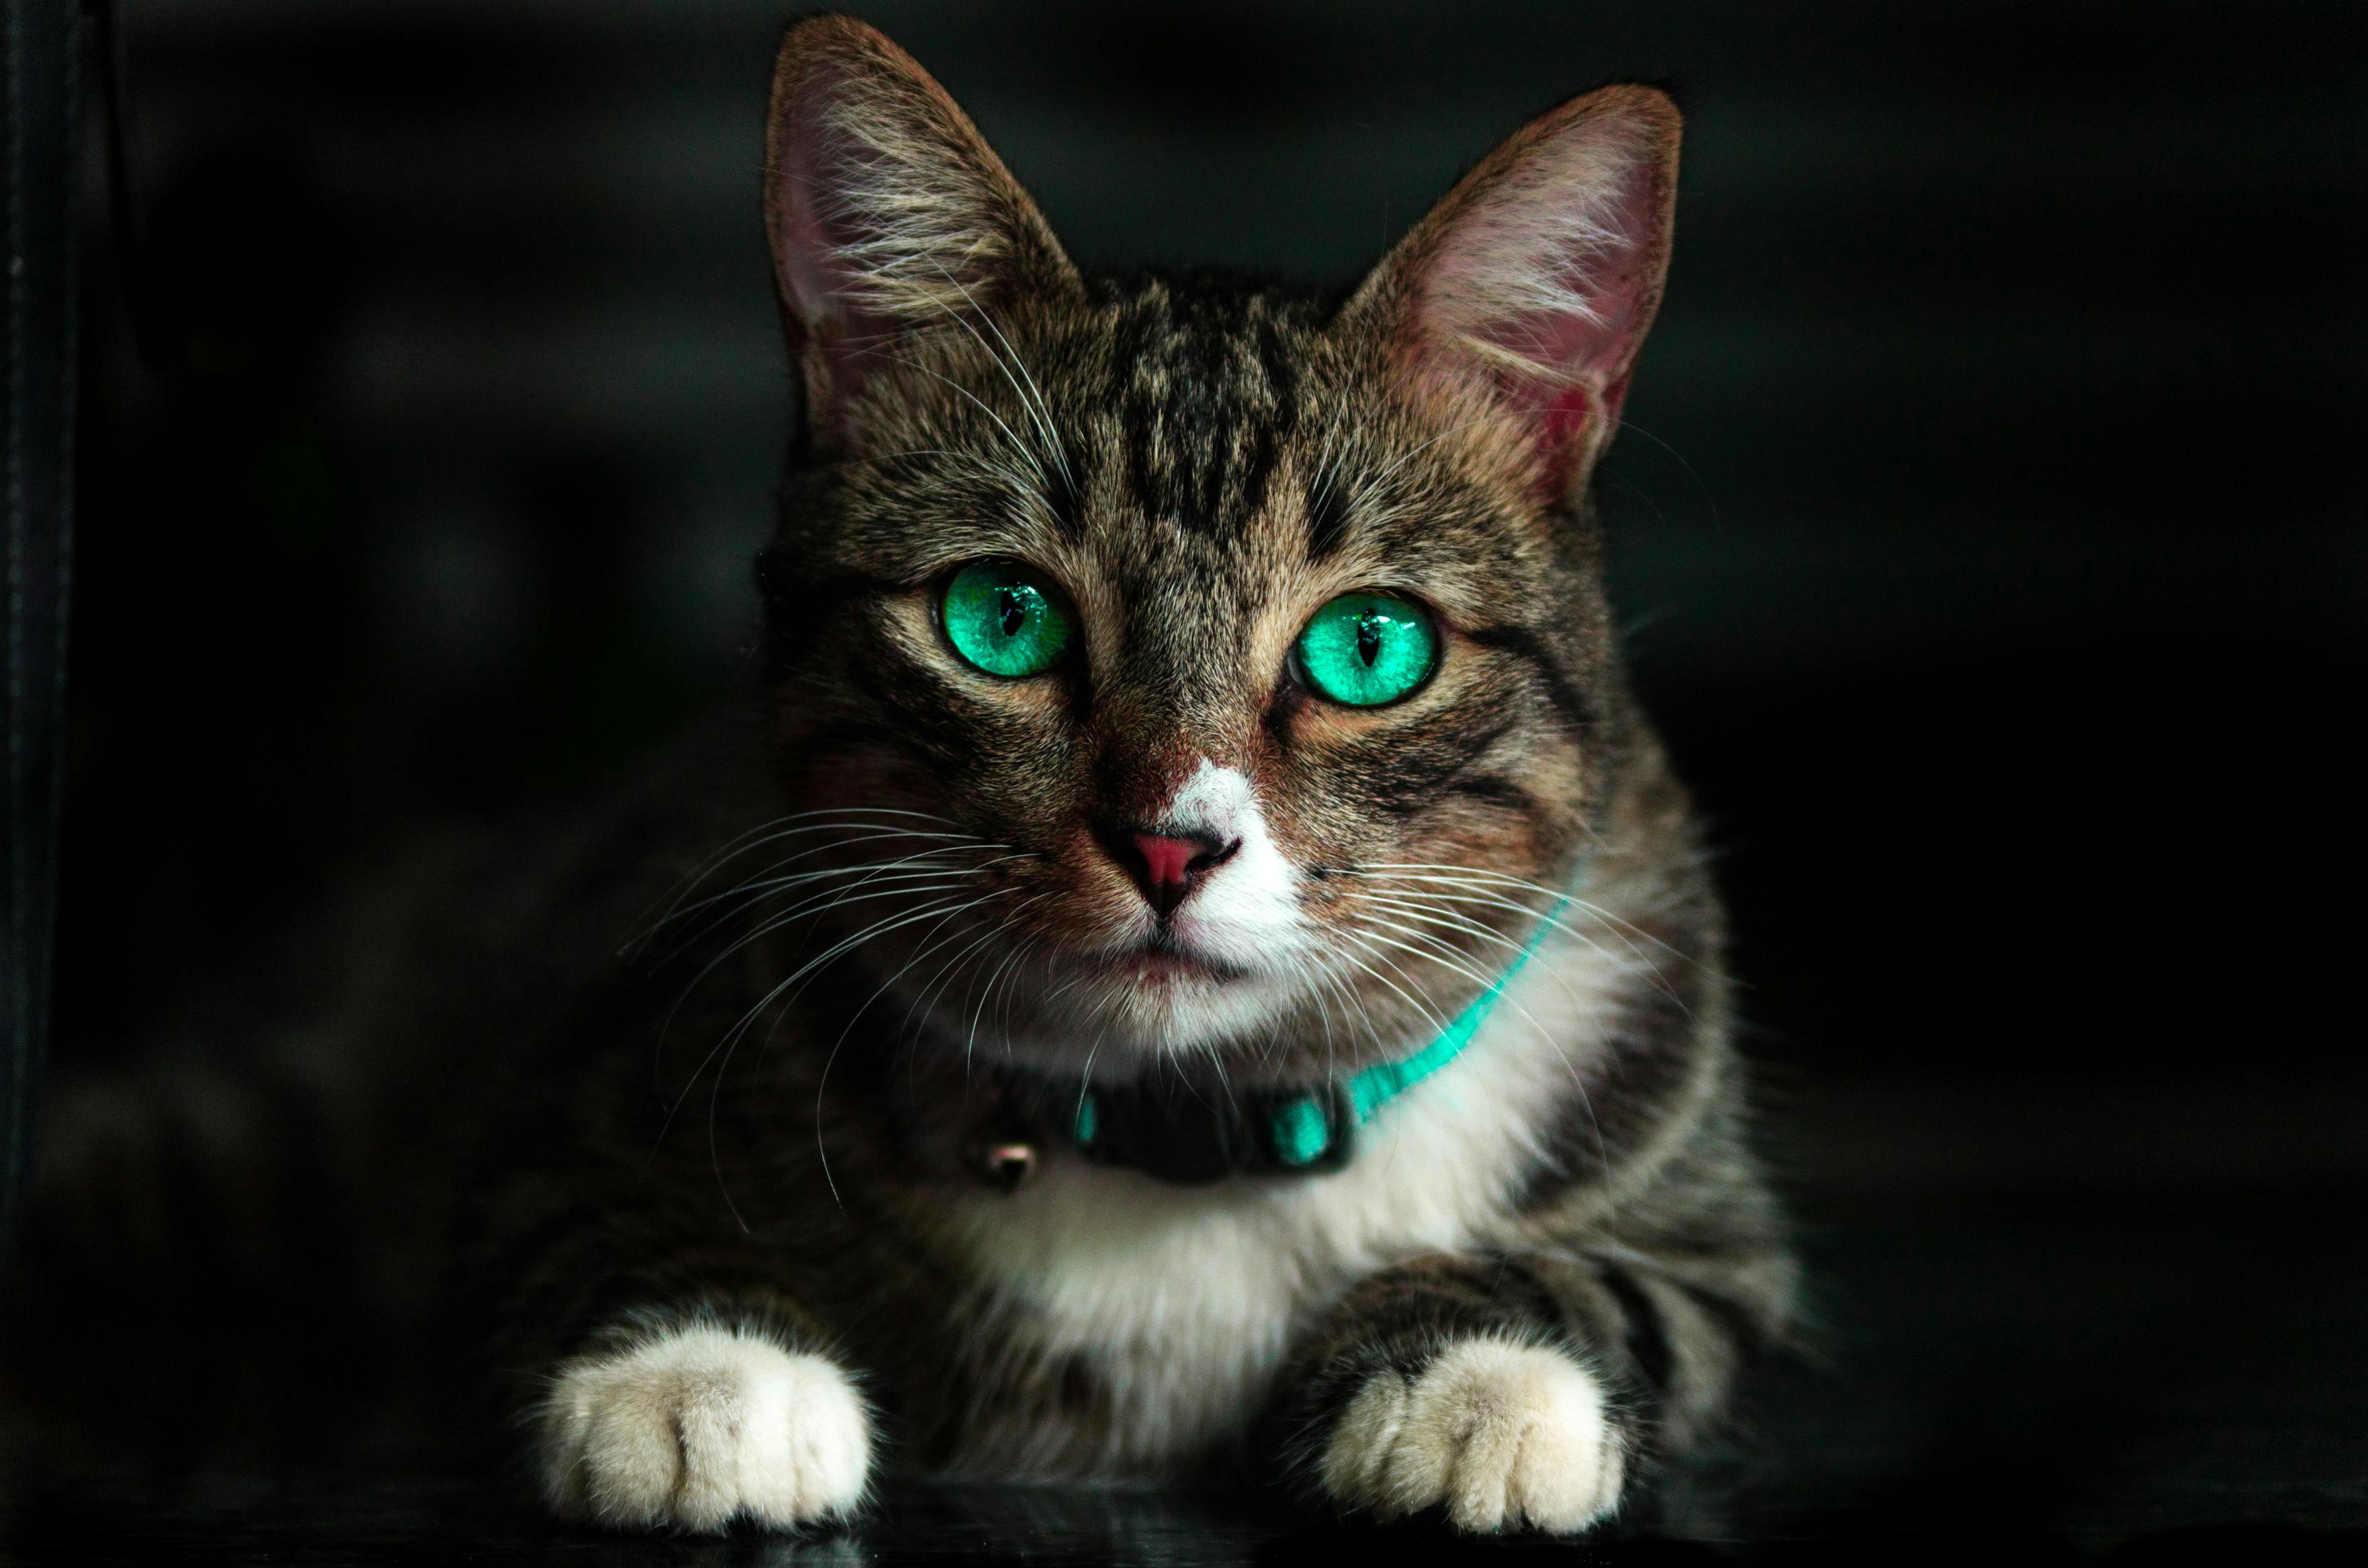 Cat with glowing green eyes and matching collar